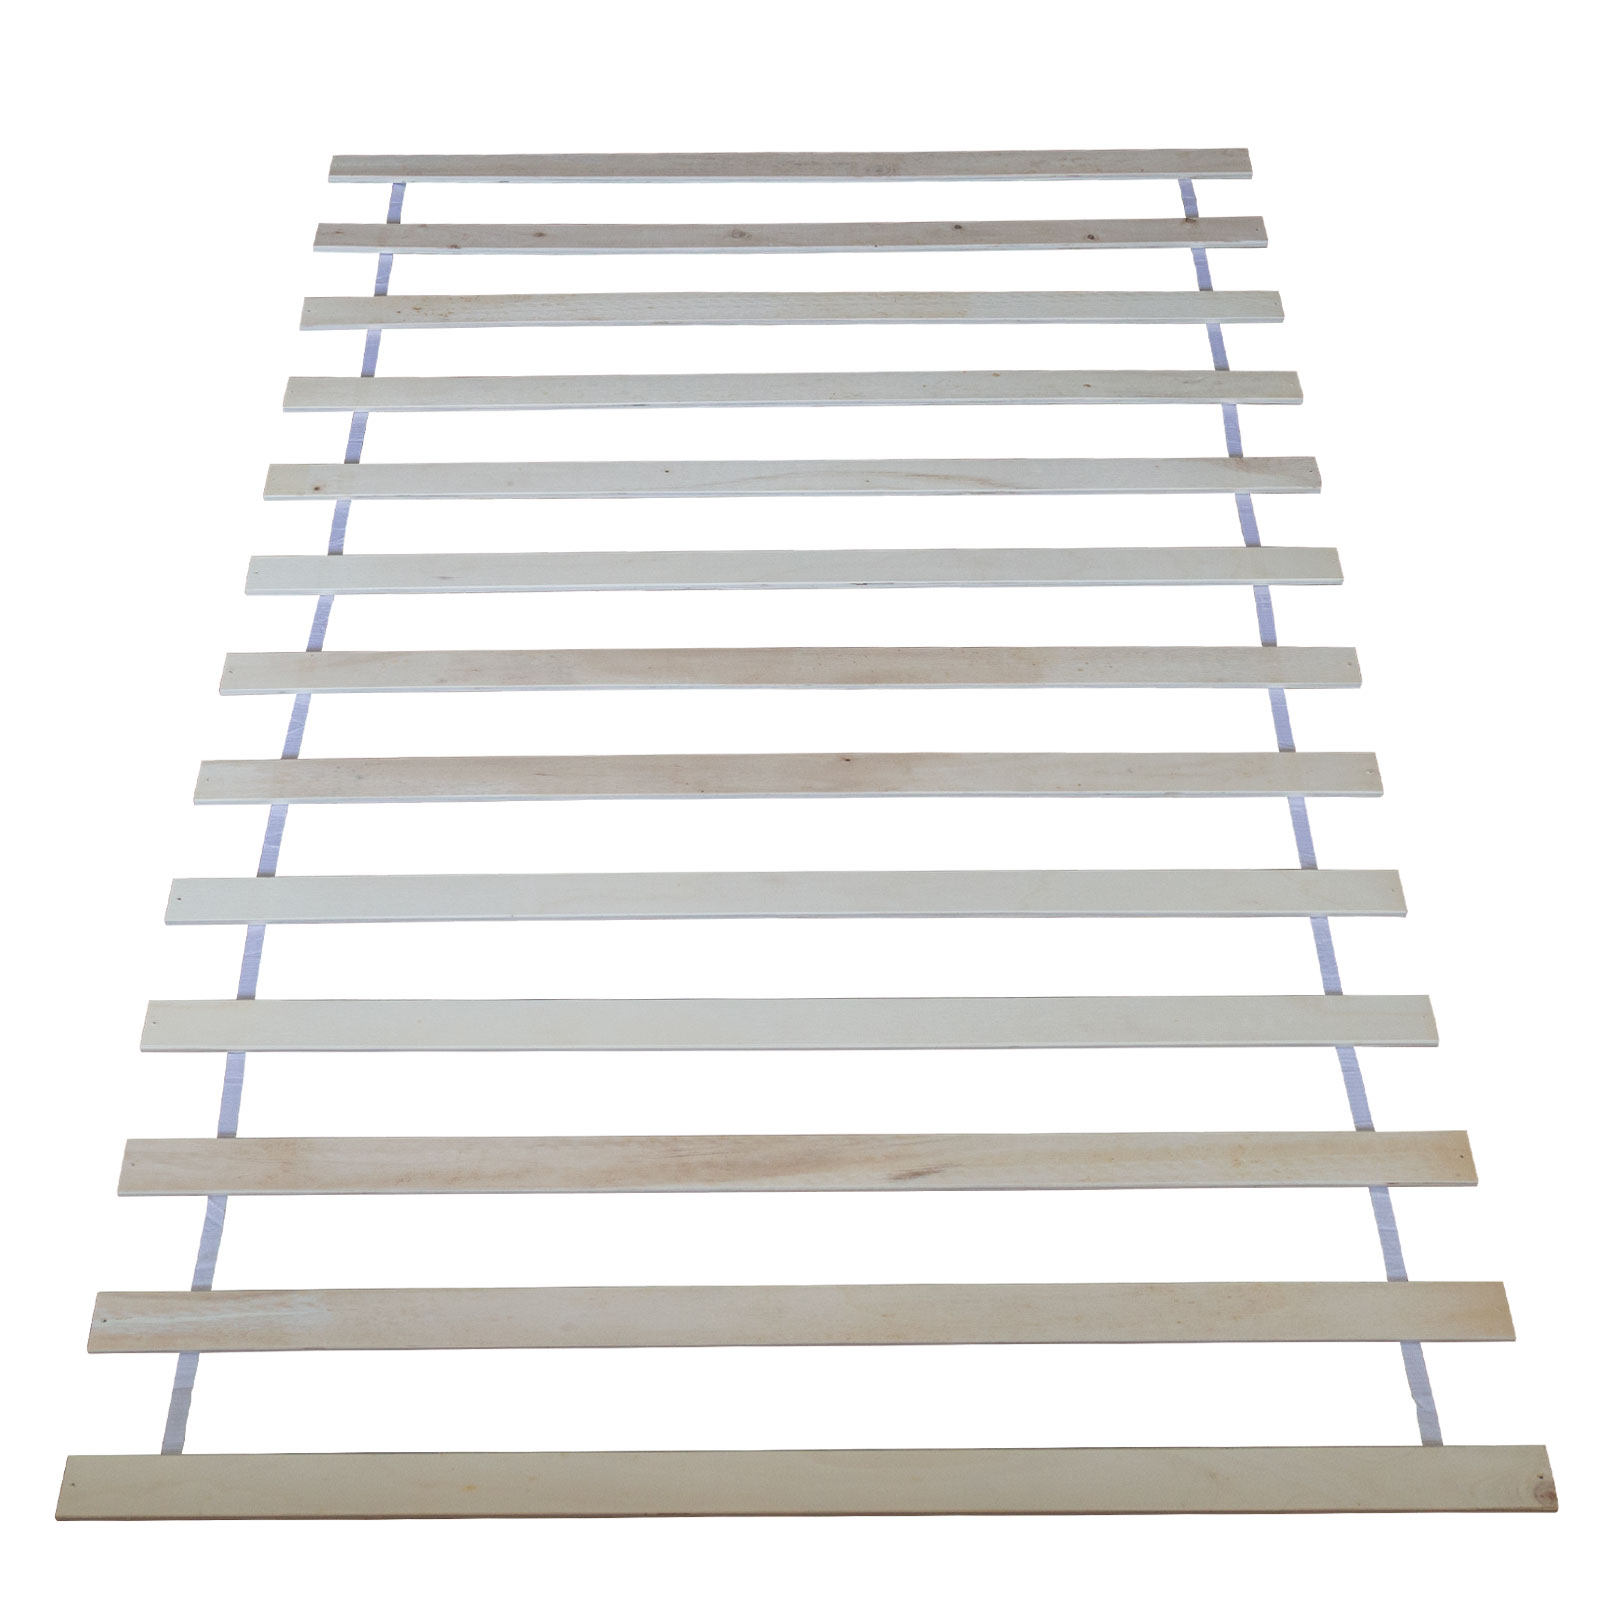 Bed Slats for Wooden Beds 140 x 200 cm pine wood